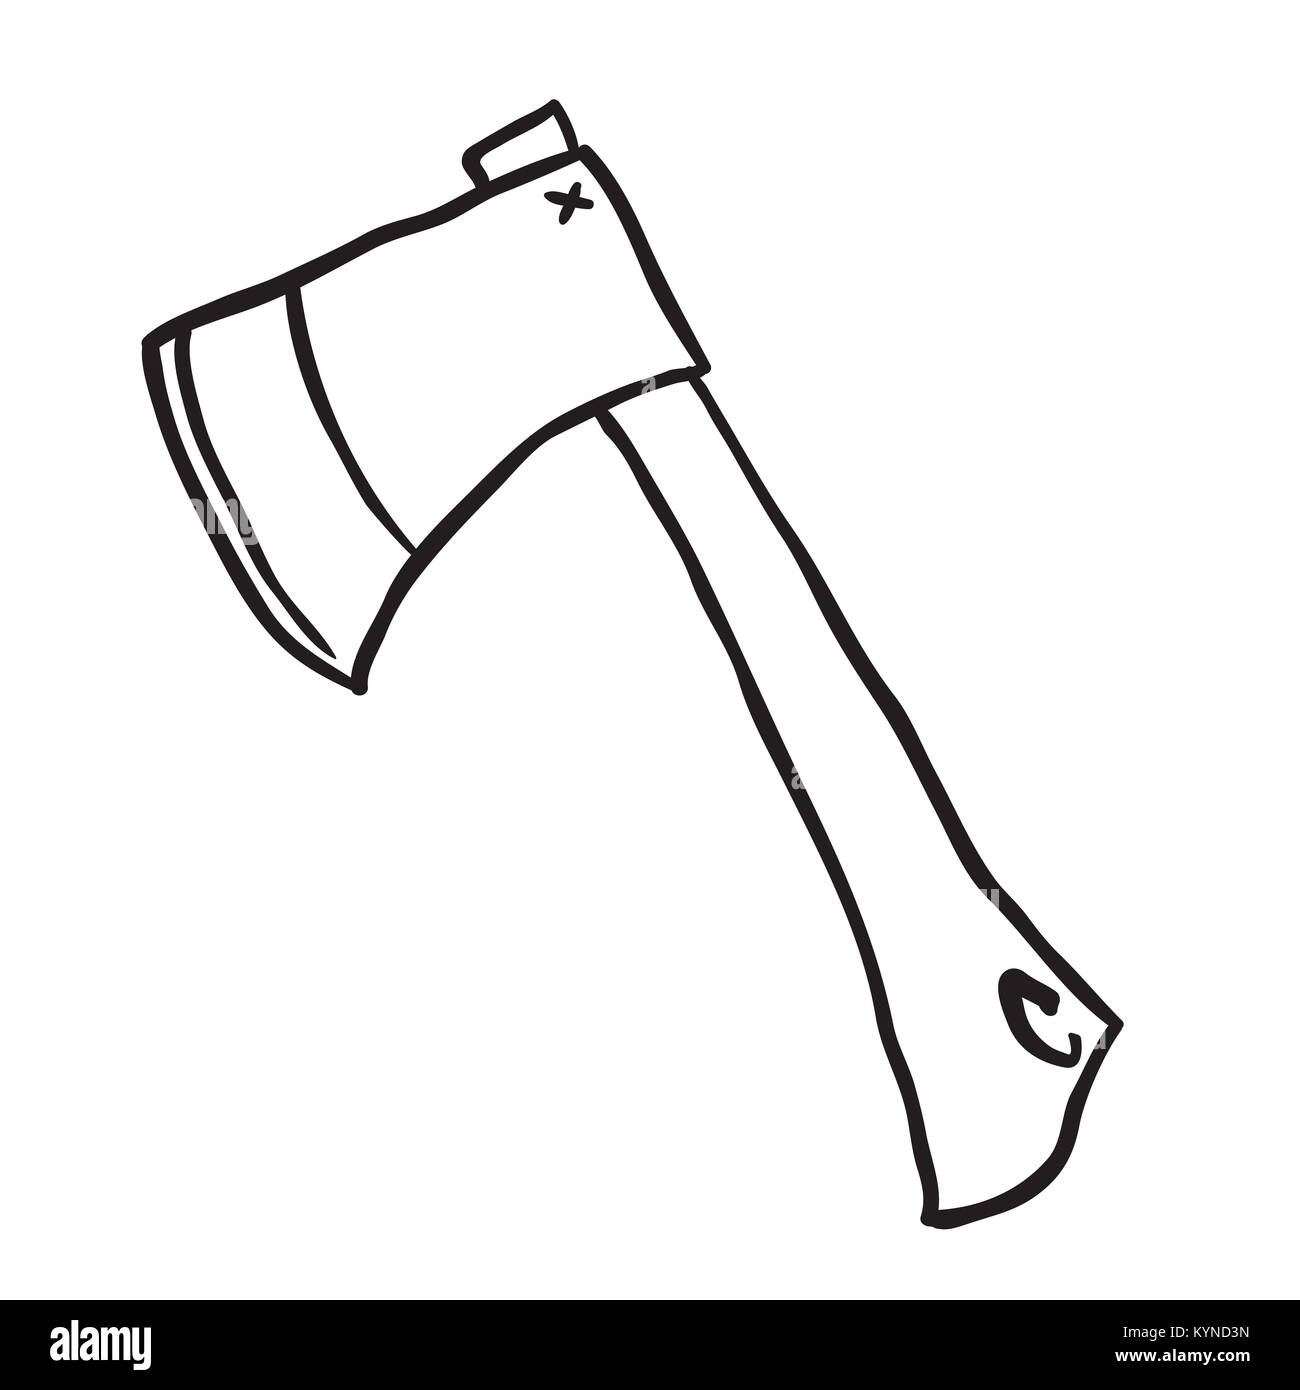 Draaien Lam aankomst Cartoon axe Black and White Stock Photos & Images - Alamy